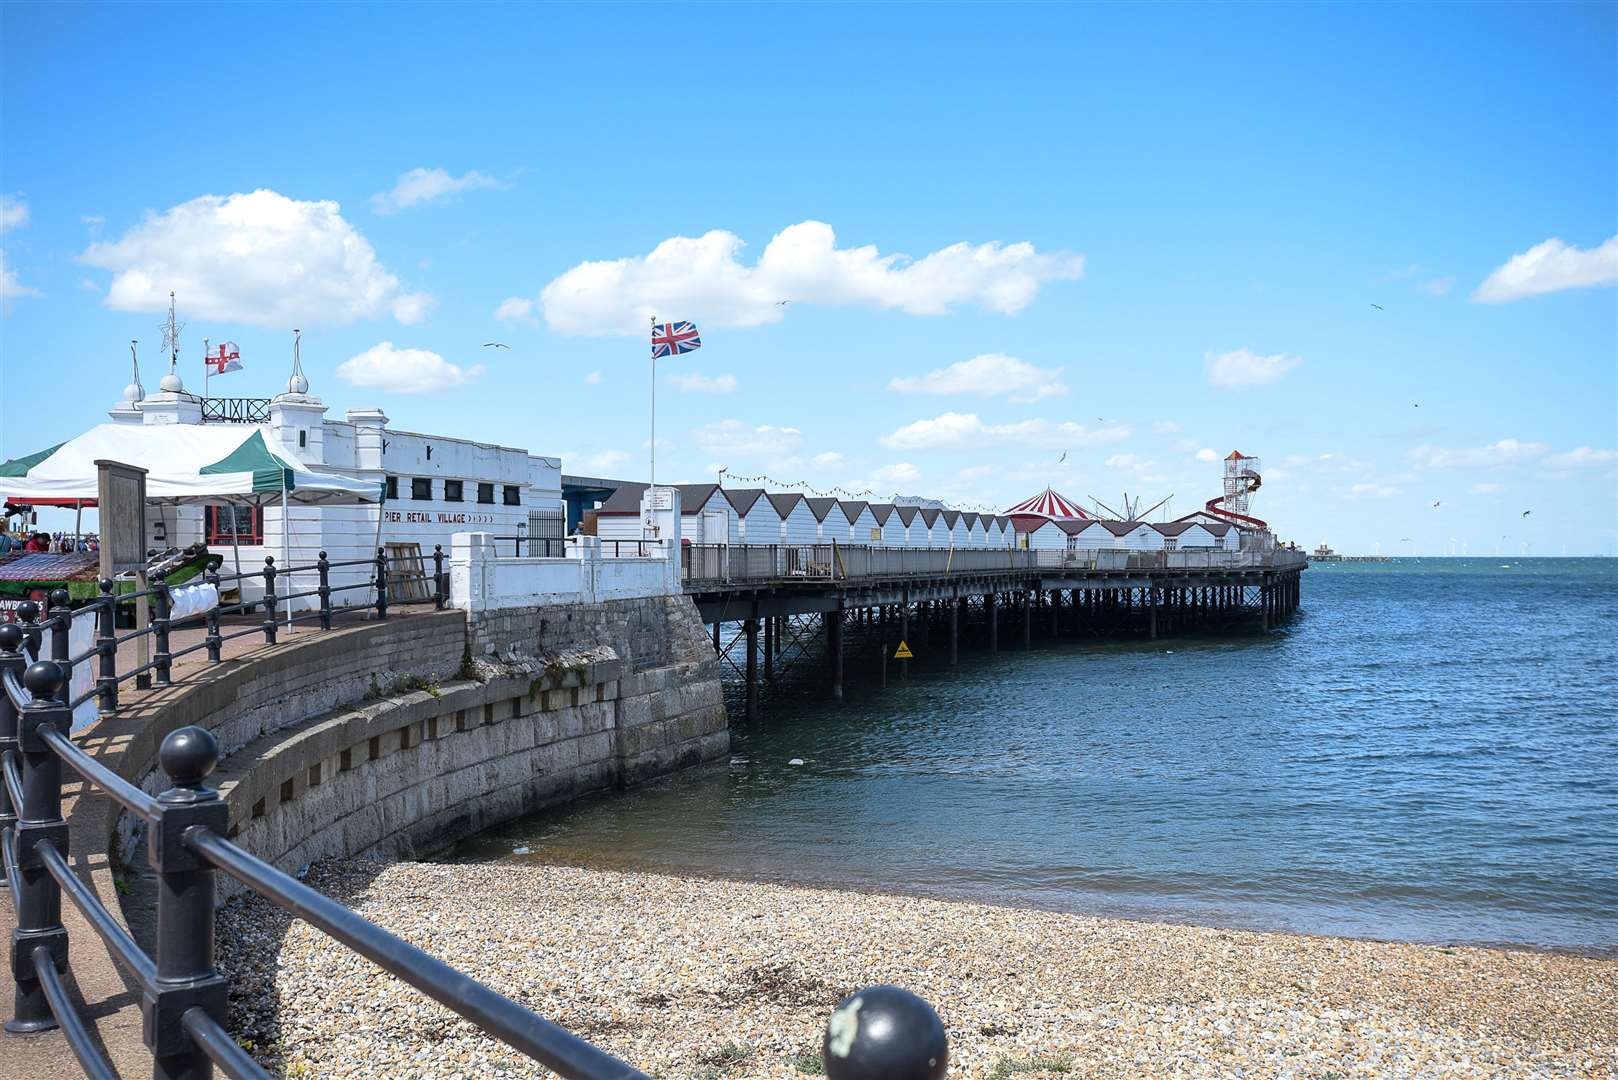 Herne Bay Pier was once the second longest in the country